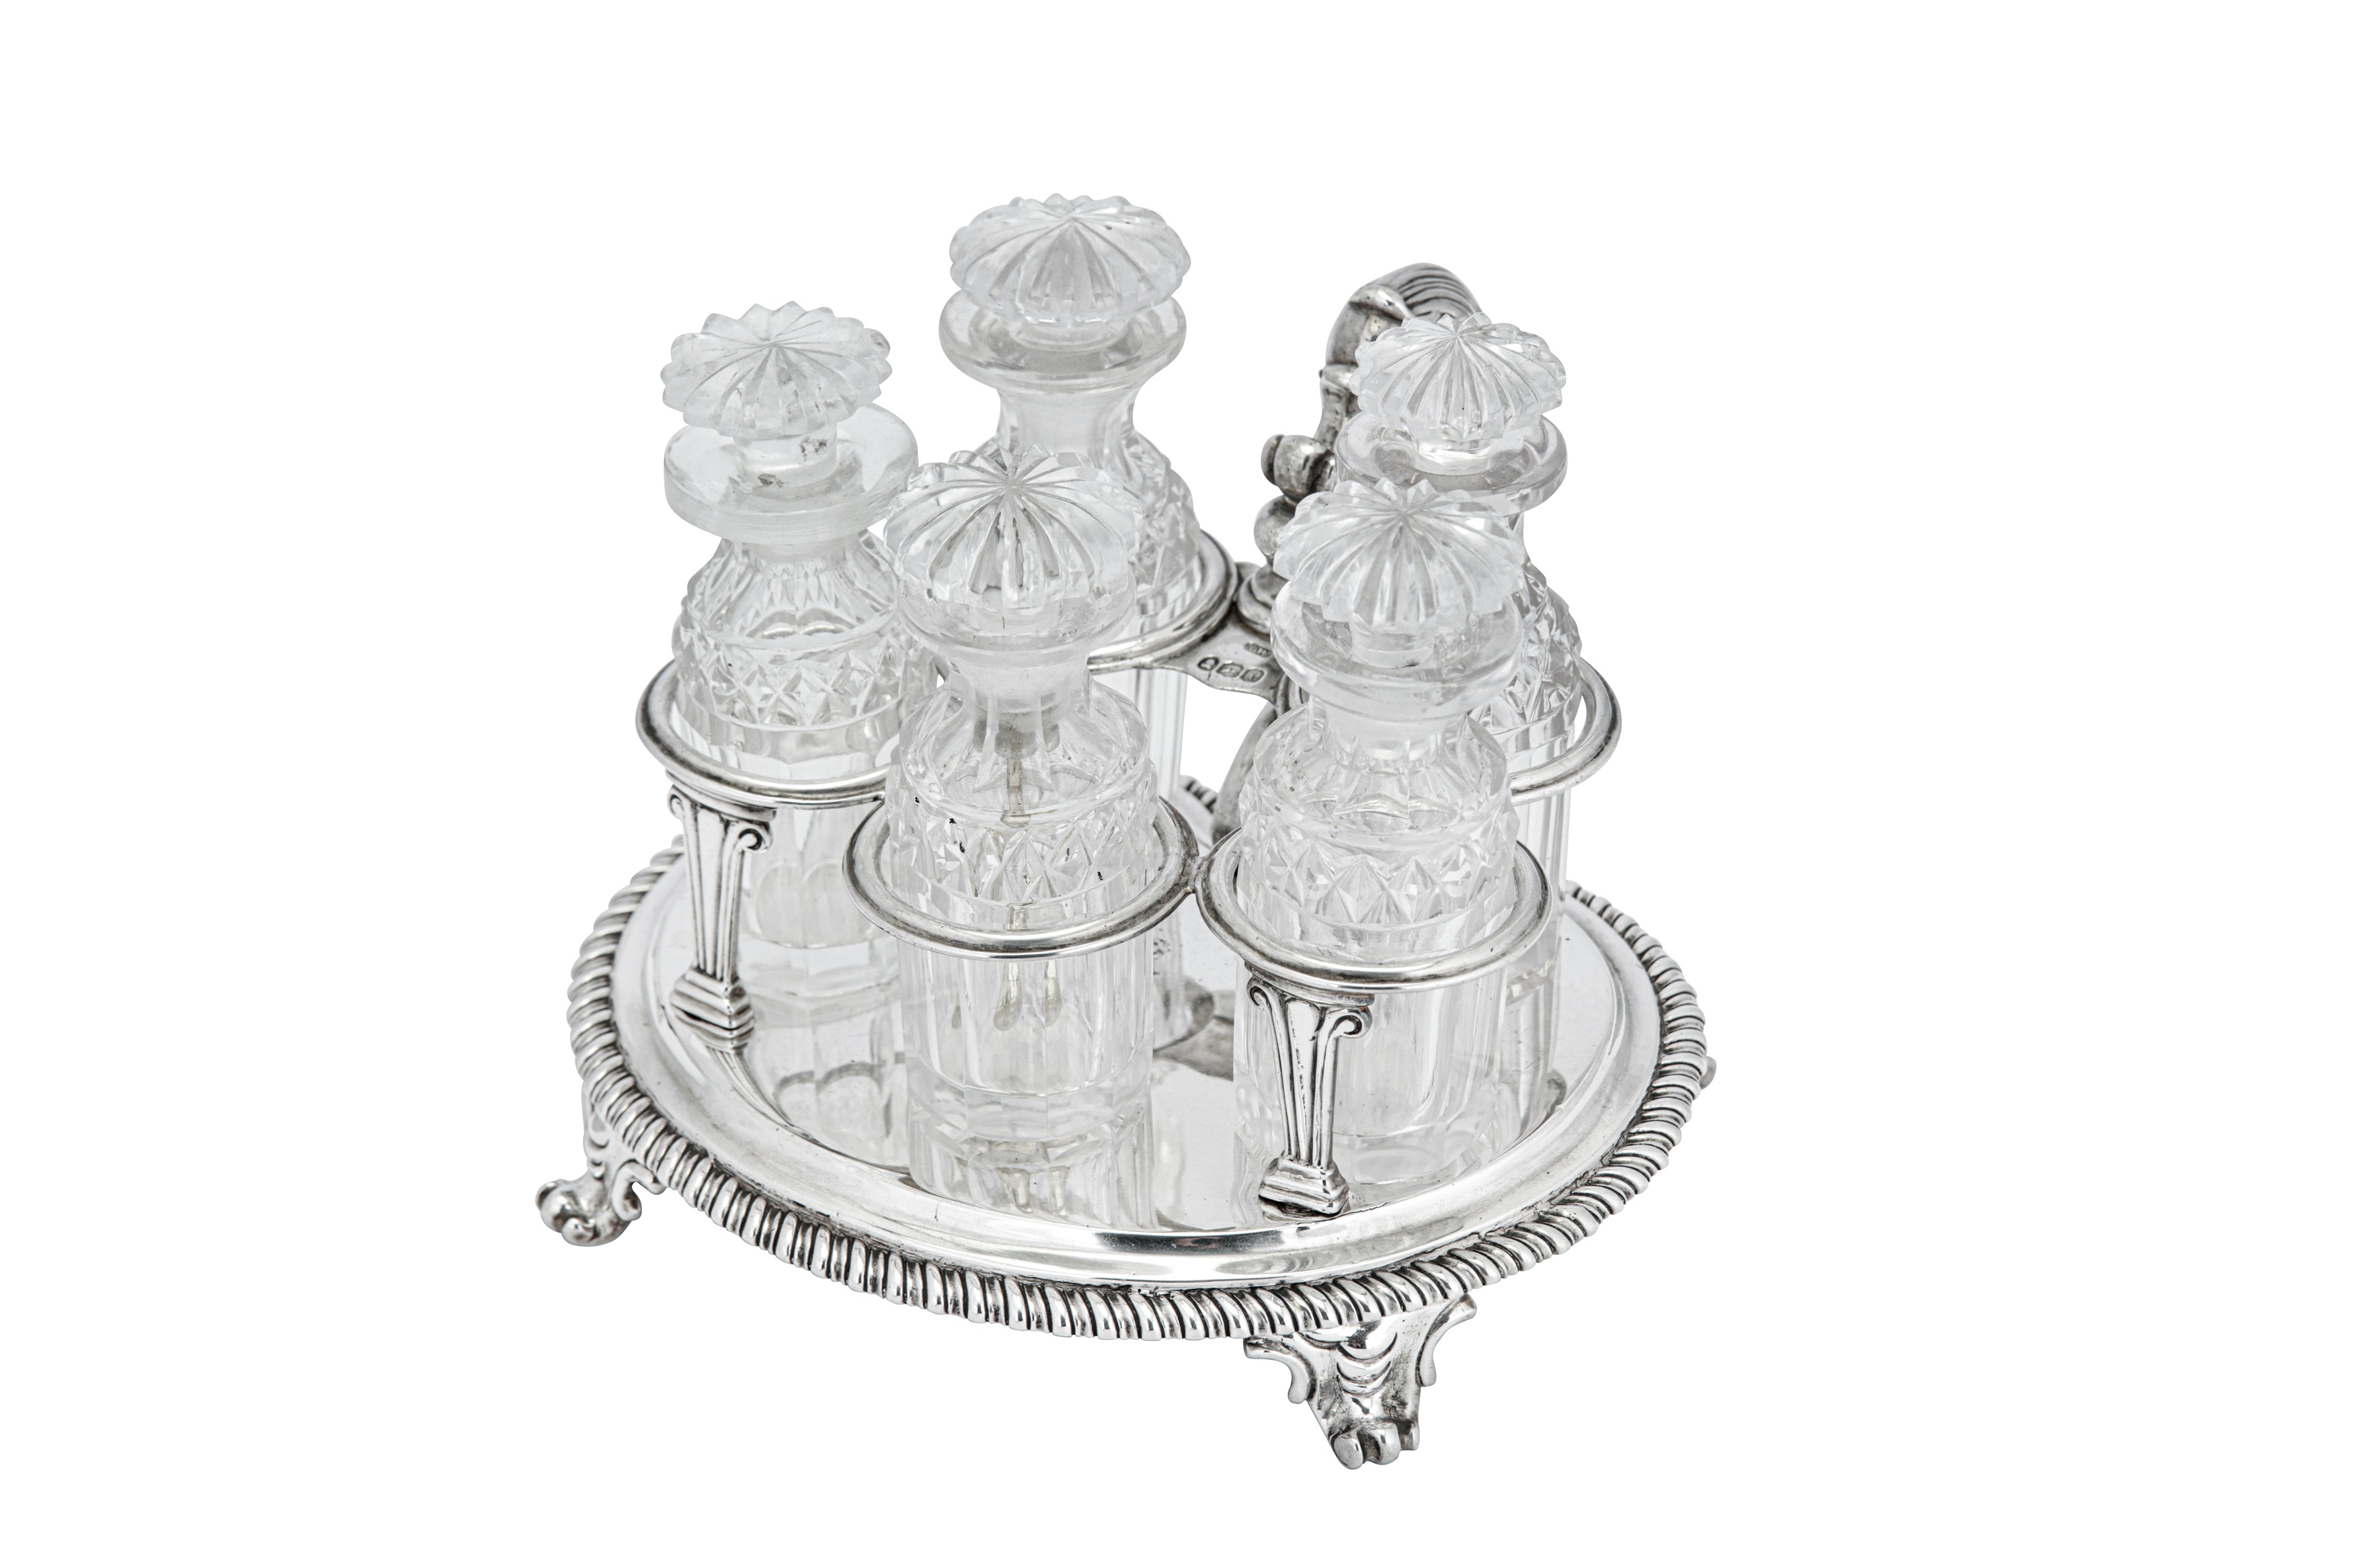 A George IV sterling silver sauce bottle cruet, London 1824 by Samuel Whitford II - Image 2 of 4